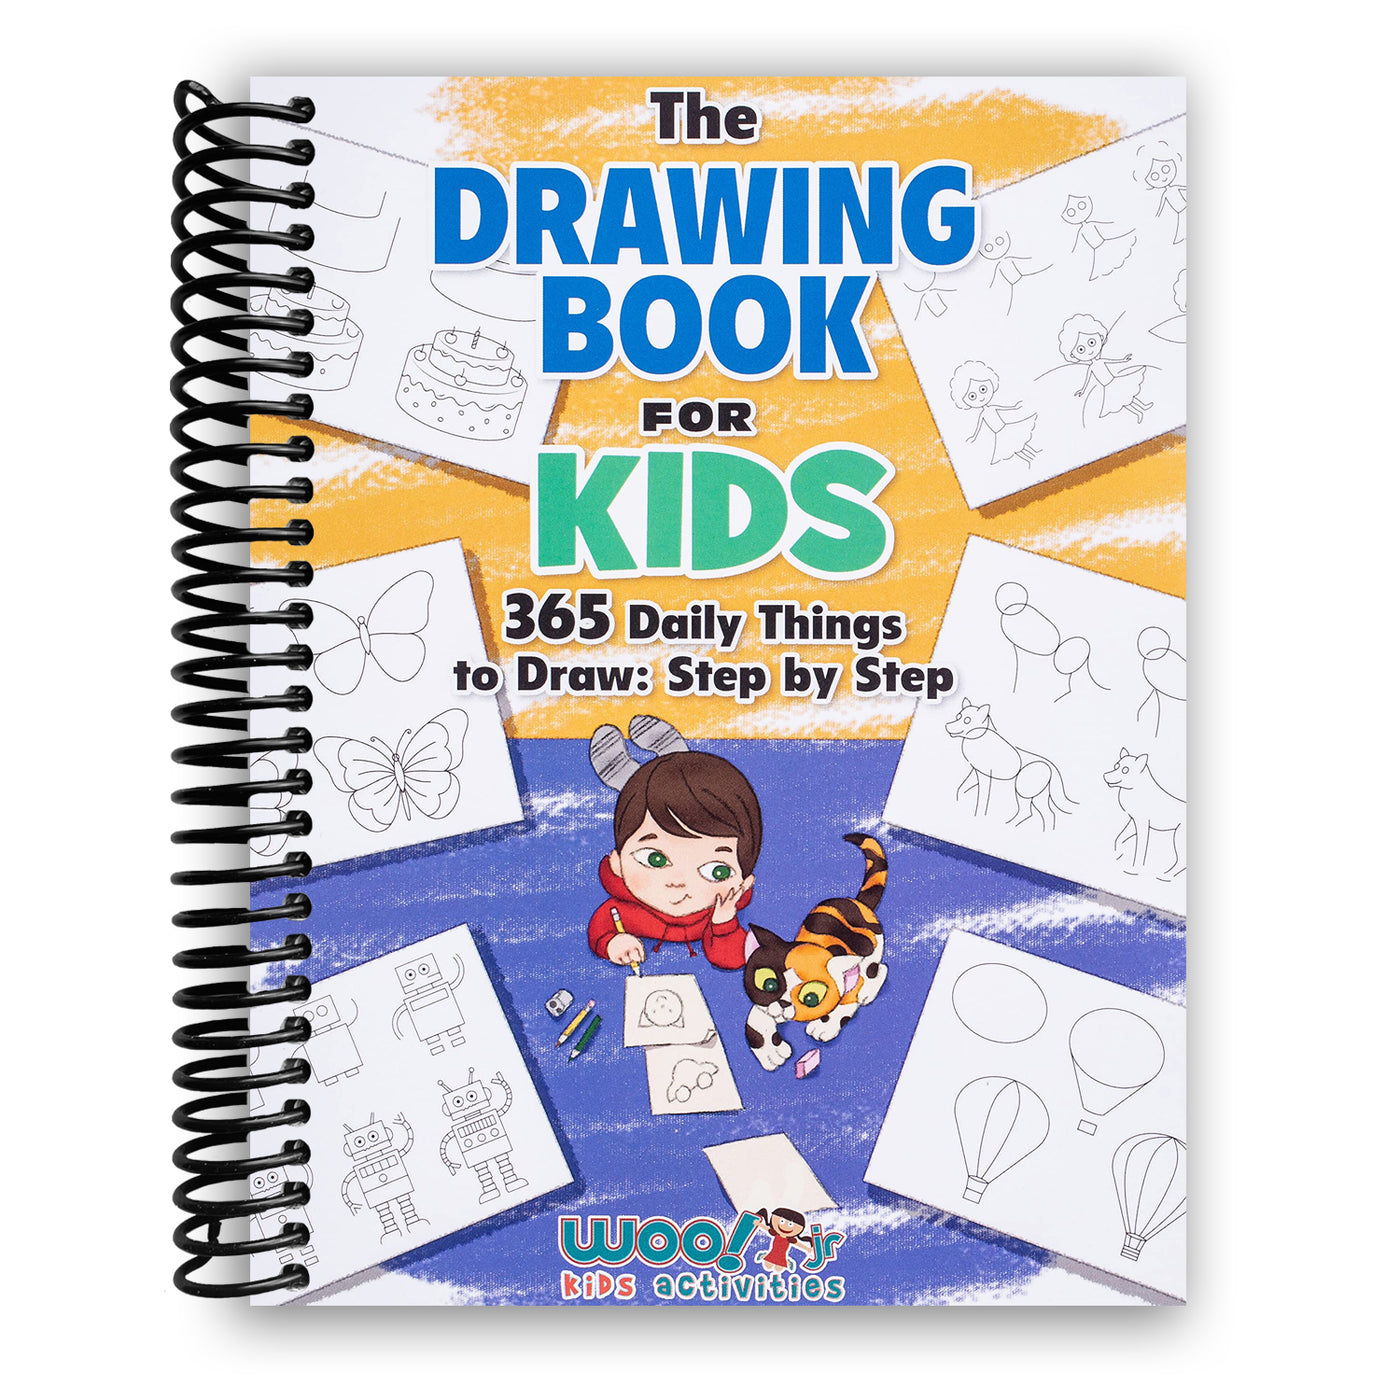 The Drawing Book for Kids: 365 Daily Things to Draw, Step by Step (Woo! Jr. Kids Activities Books) (Spiral Bound)